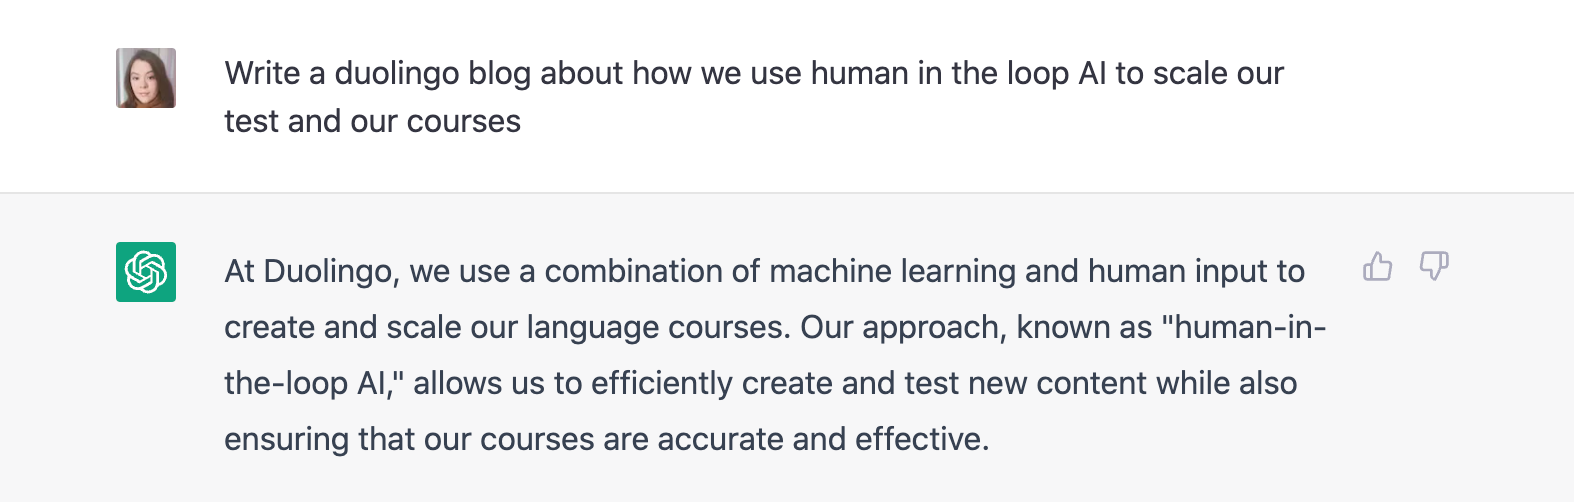 A text screenshot that shows Sophie's prompt to GPT-3 and its response. Sophie asked: "Write a duolingo blog about how we use human in the loop AI to scale our test and our courses." GPT-3 responded (first paragraph): "At Duolingo, we use a combination of machine learning and human input to create and scale our language courses. Our approach, known as "human-in-the-loop AI," allows us to efficiently create and test new content while also ensuring that our courses are accurate and effective."